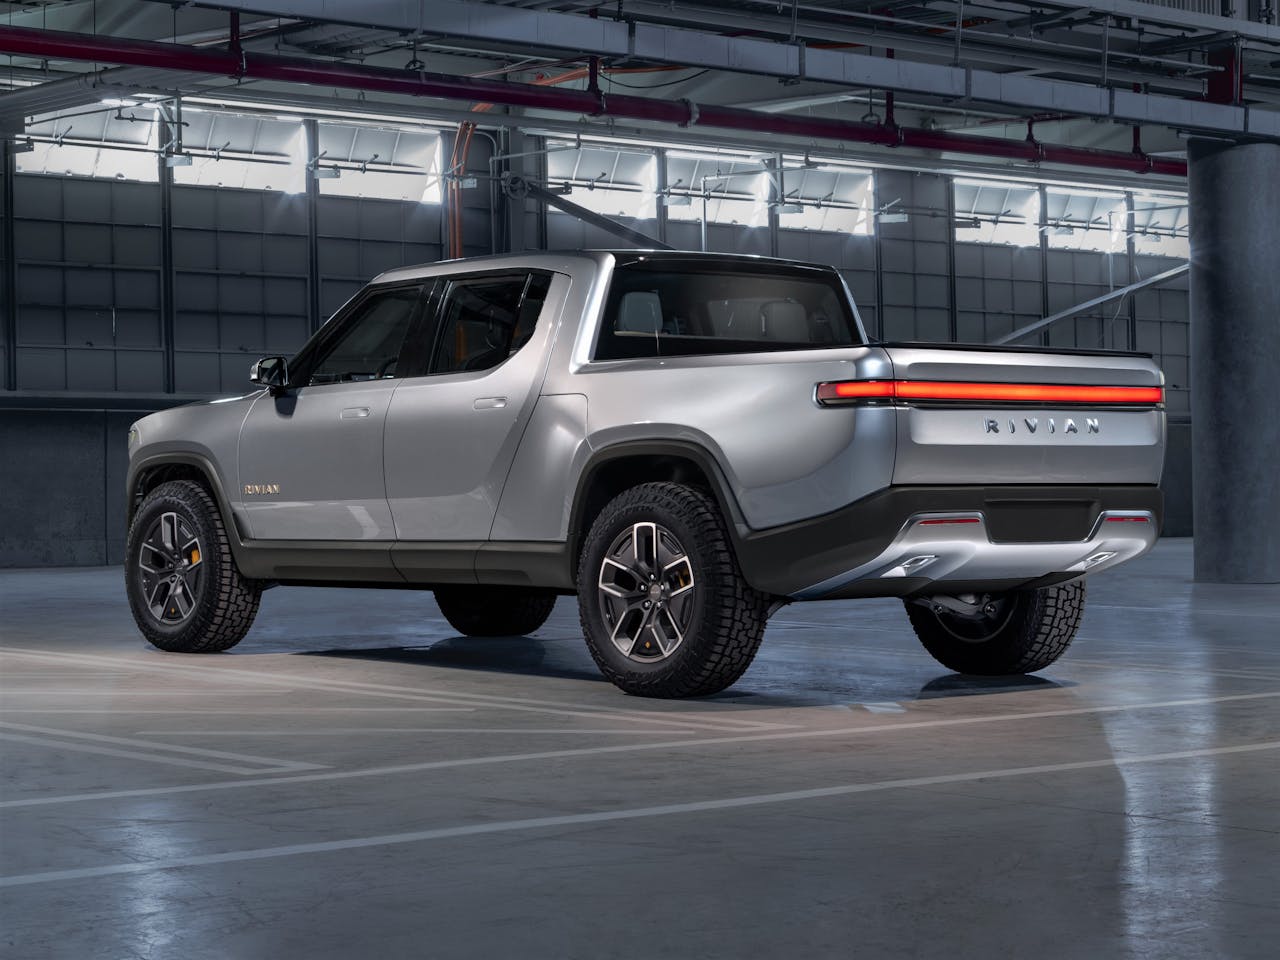 Side and tailgate of the all-electric Rivian R1T ™ truck